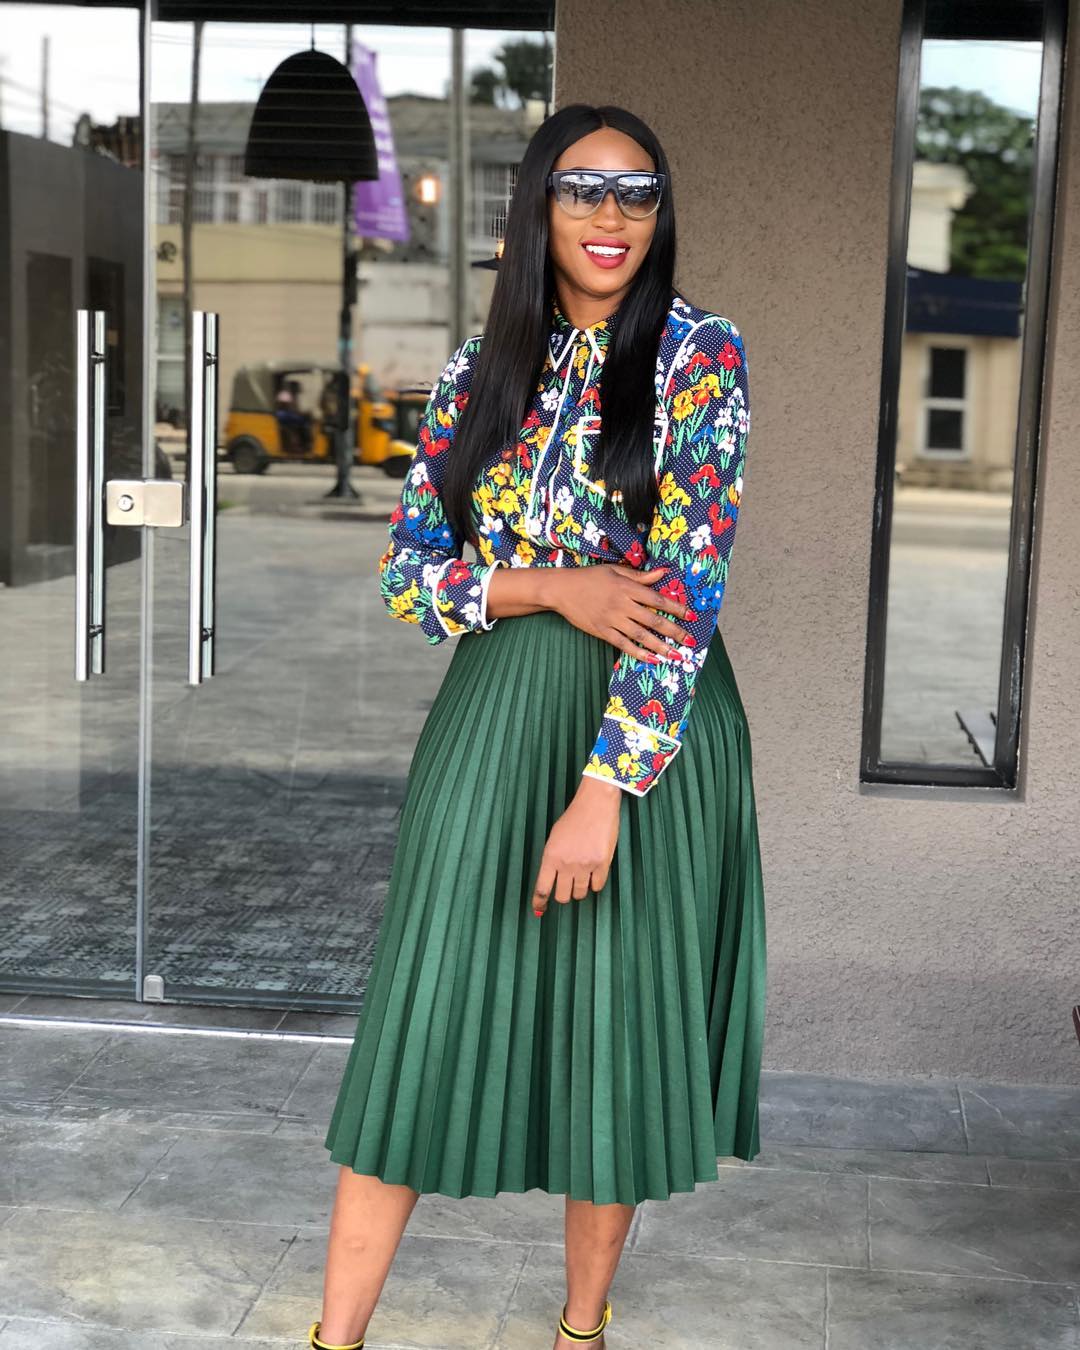 Veronica Odeka Style: 8 Chic Ways She Styled Her Pleated Green Skirt